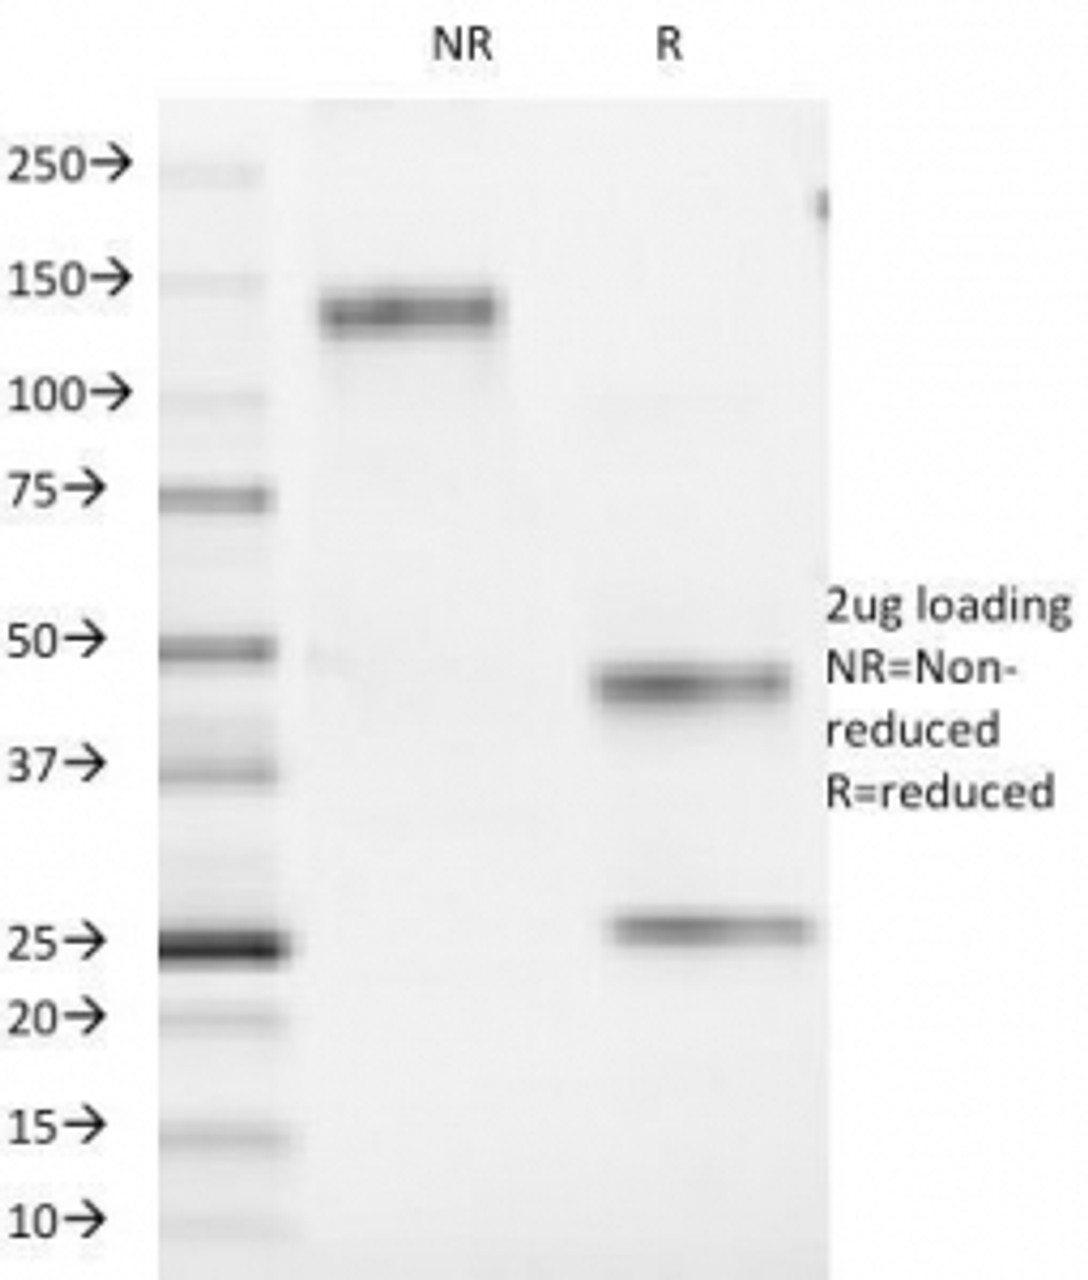 SDS-PAGE Analysis of Purified, BSA-Free CD1a Antibody (clone 66IIC7) . Confirmation of Integrity and Purity of the Antibody.